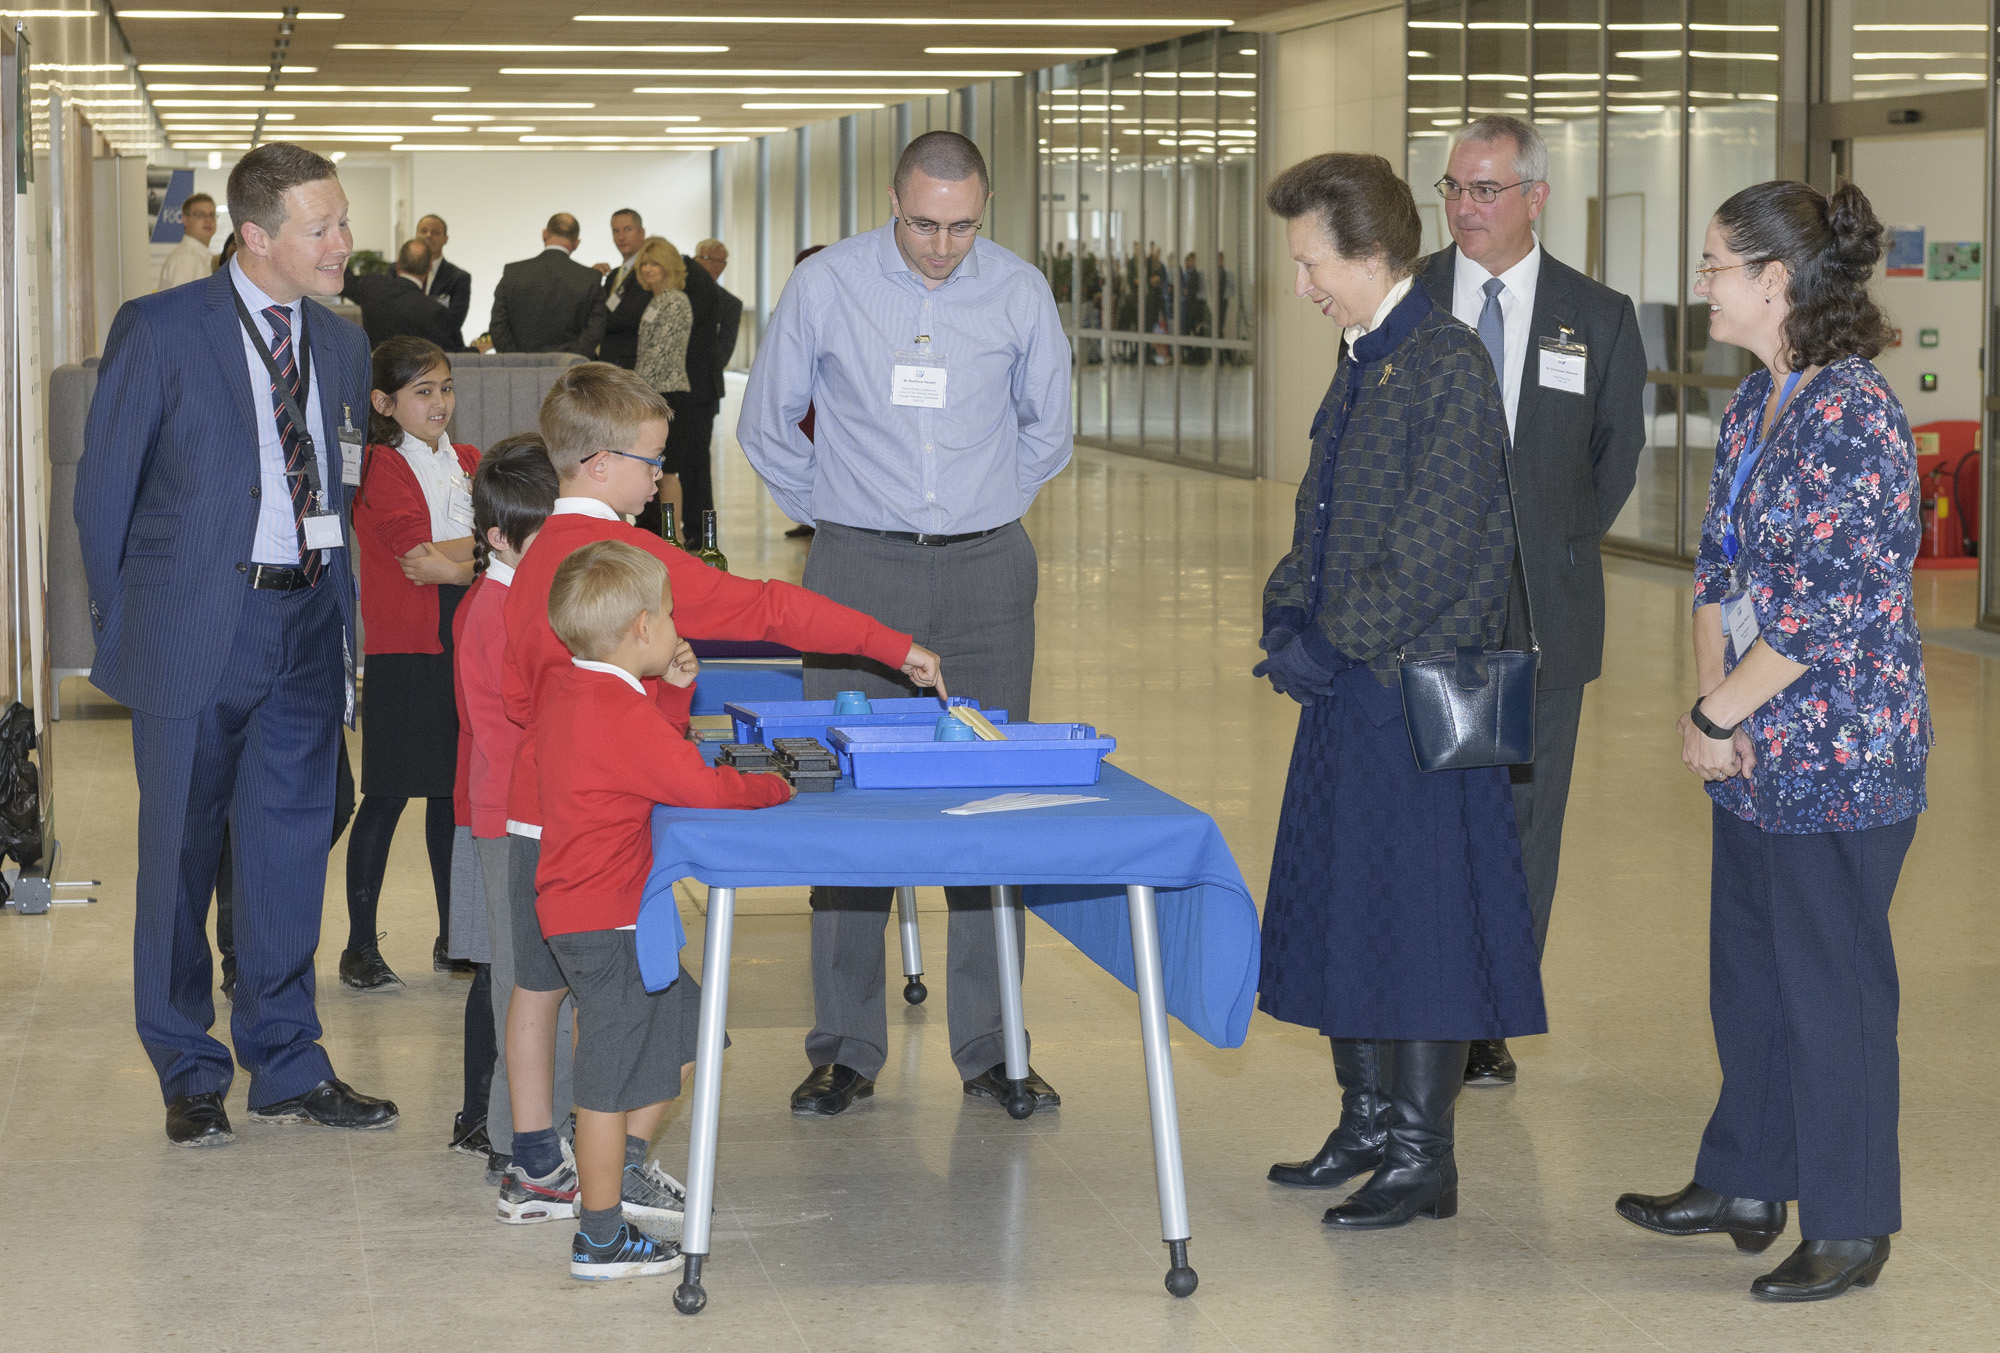 Her Royal Highness is shown a demonstration of welding with chocolate by children from Great Abington Primary School